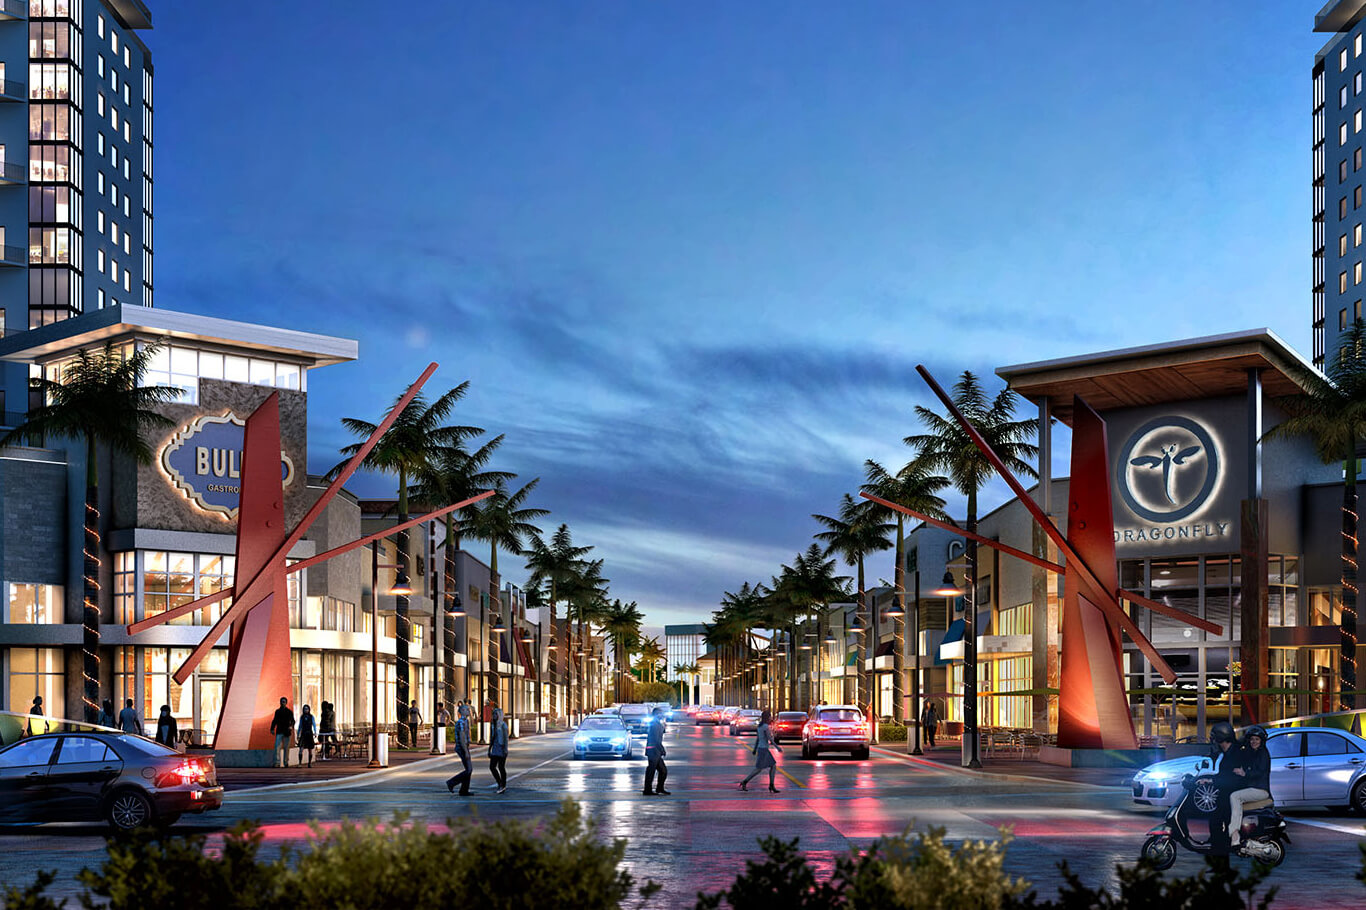 kabookaboo moves into the heart of Doral